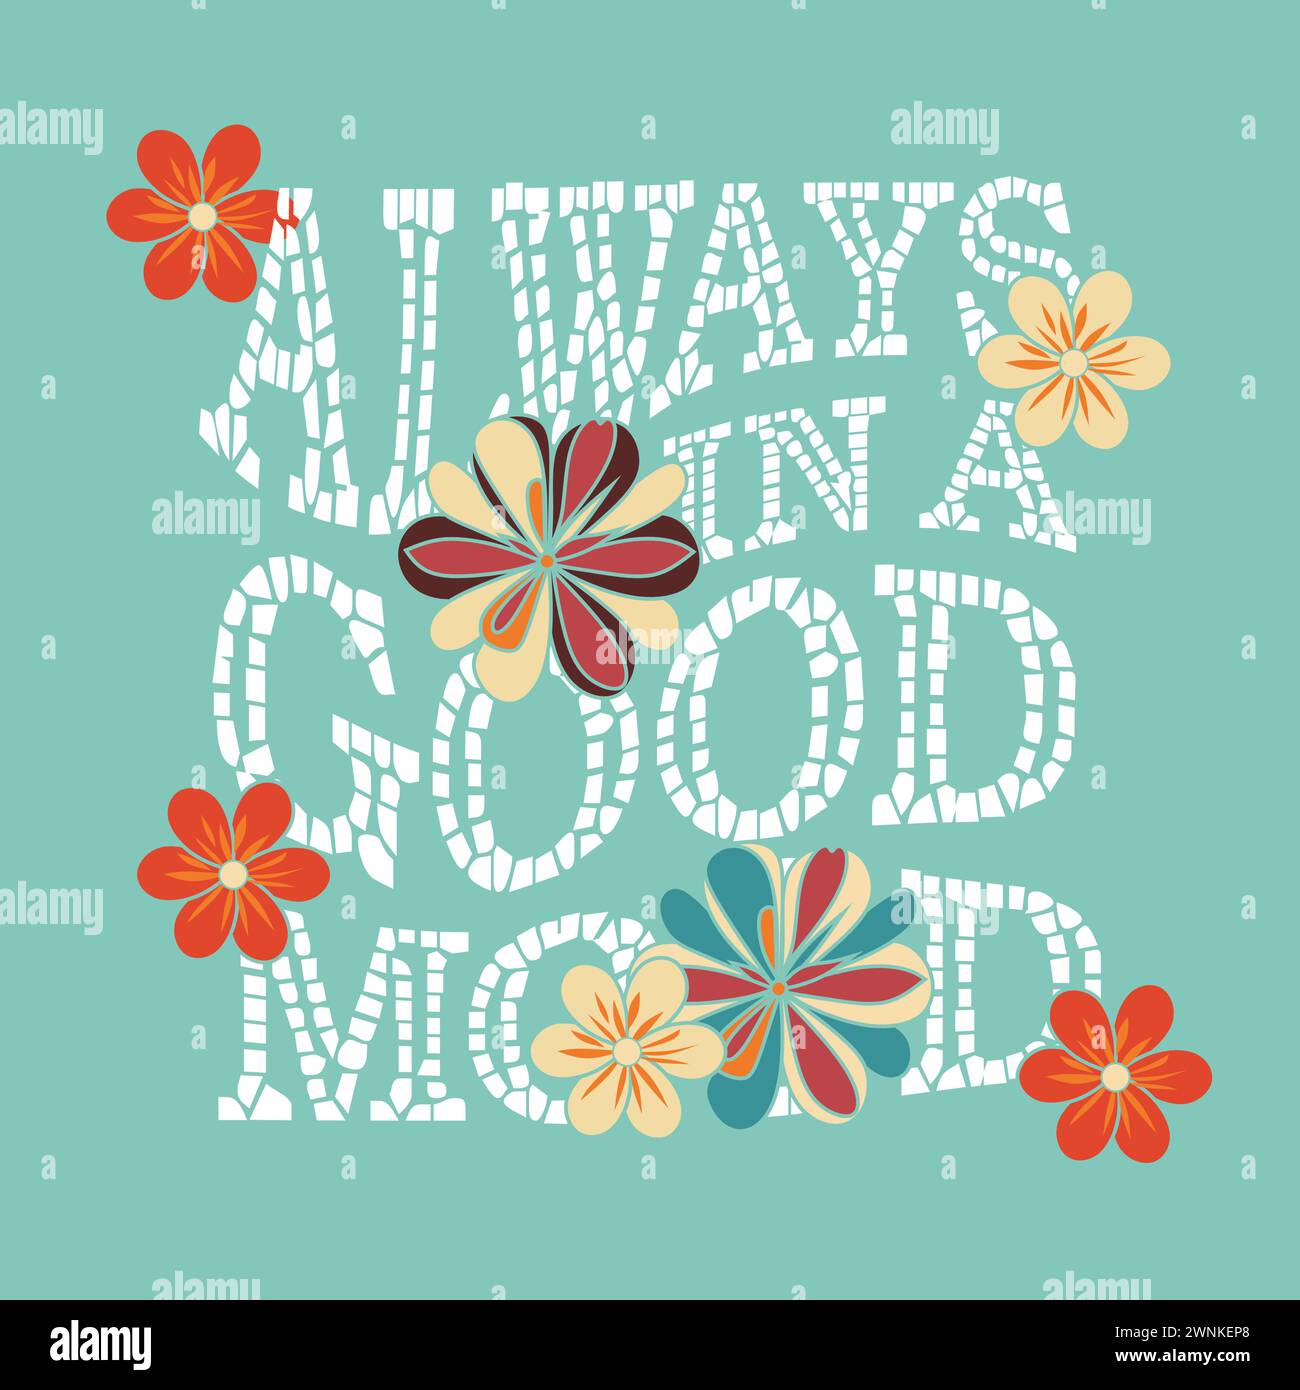 Always in a good mood  typography slogan. Vector illustration design for fashion graphics, t shirt prints, posters. Stock Vector